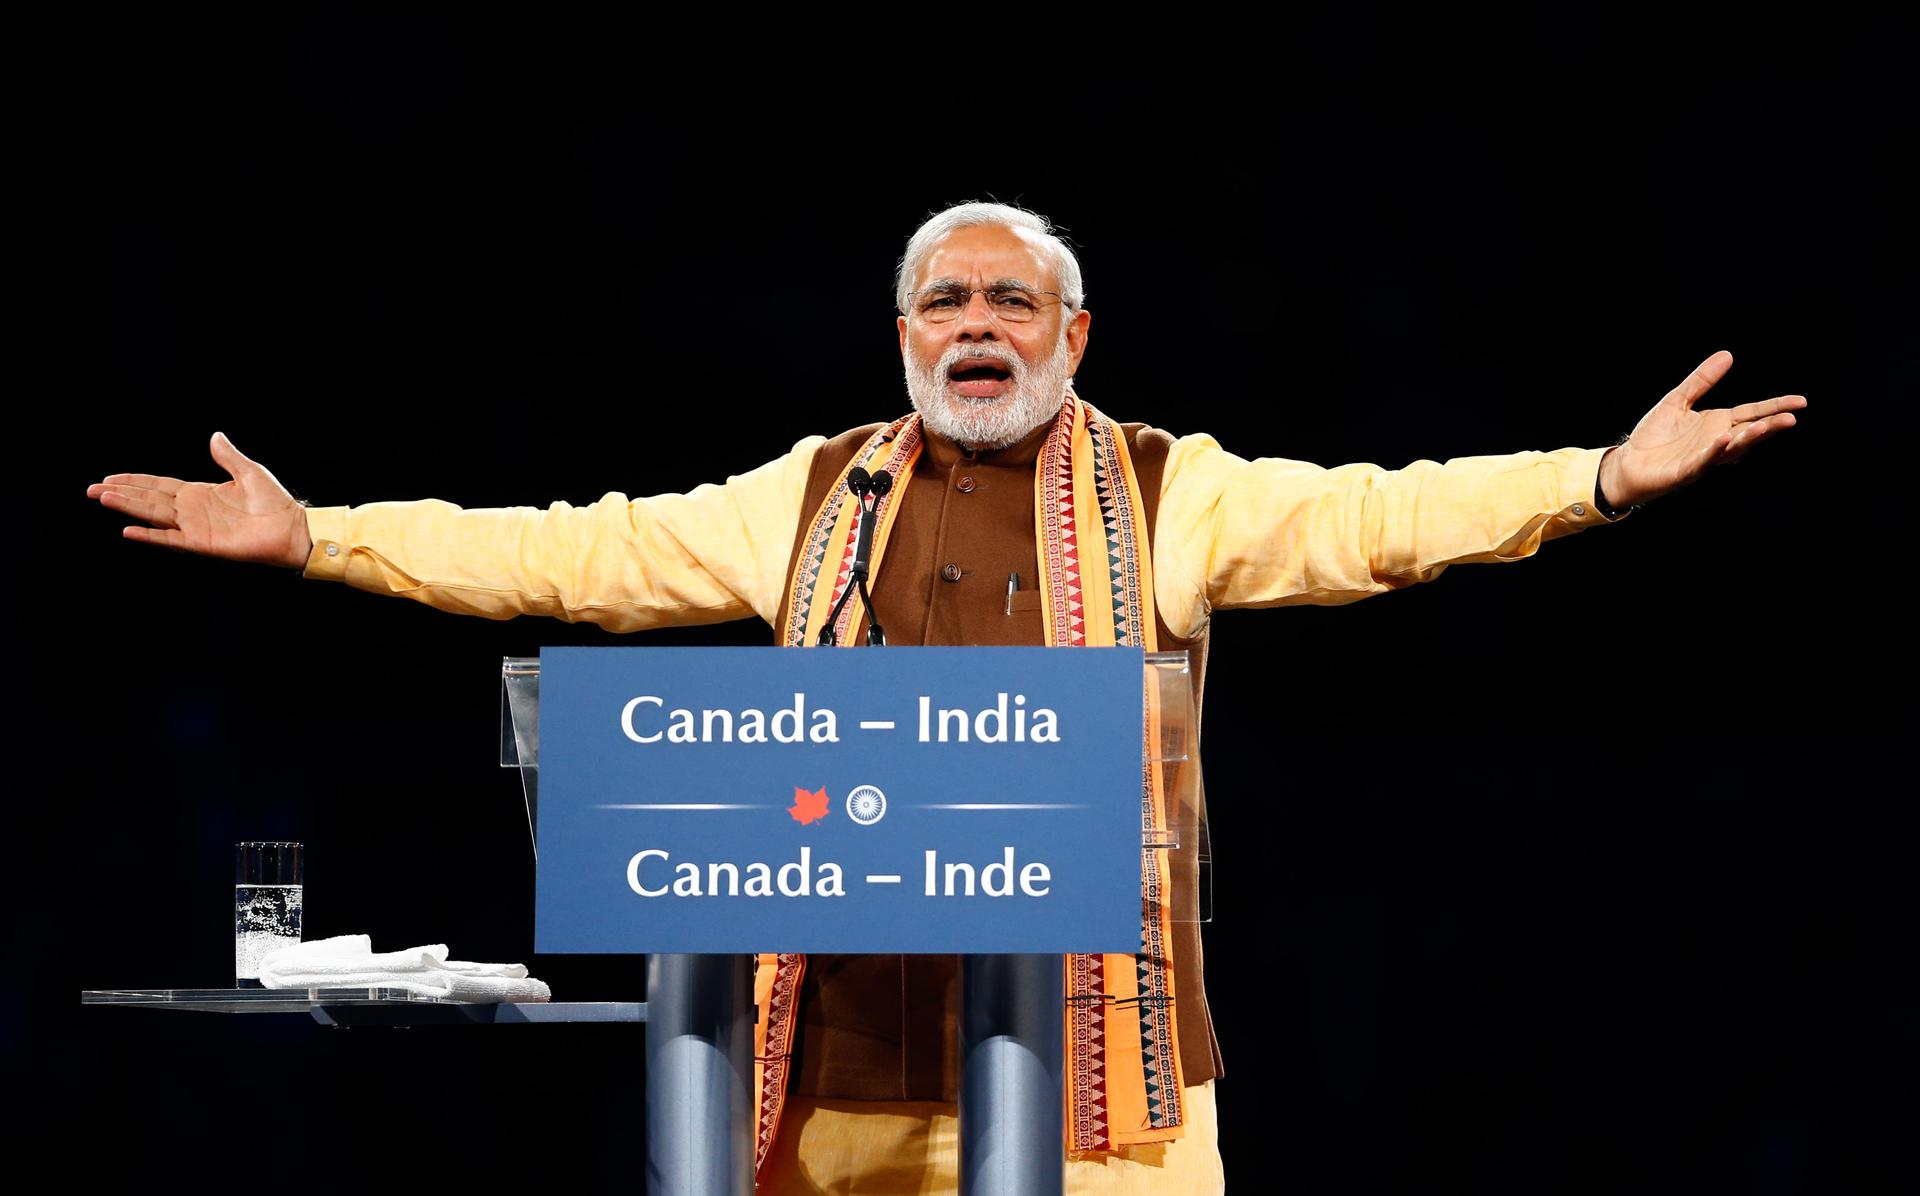 Indian Prime Minister Narendra Modi during a speech in Toronto, Canada, on April 15, 2015.